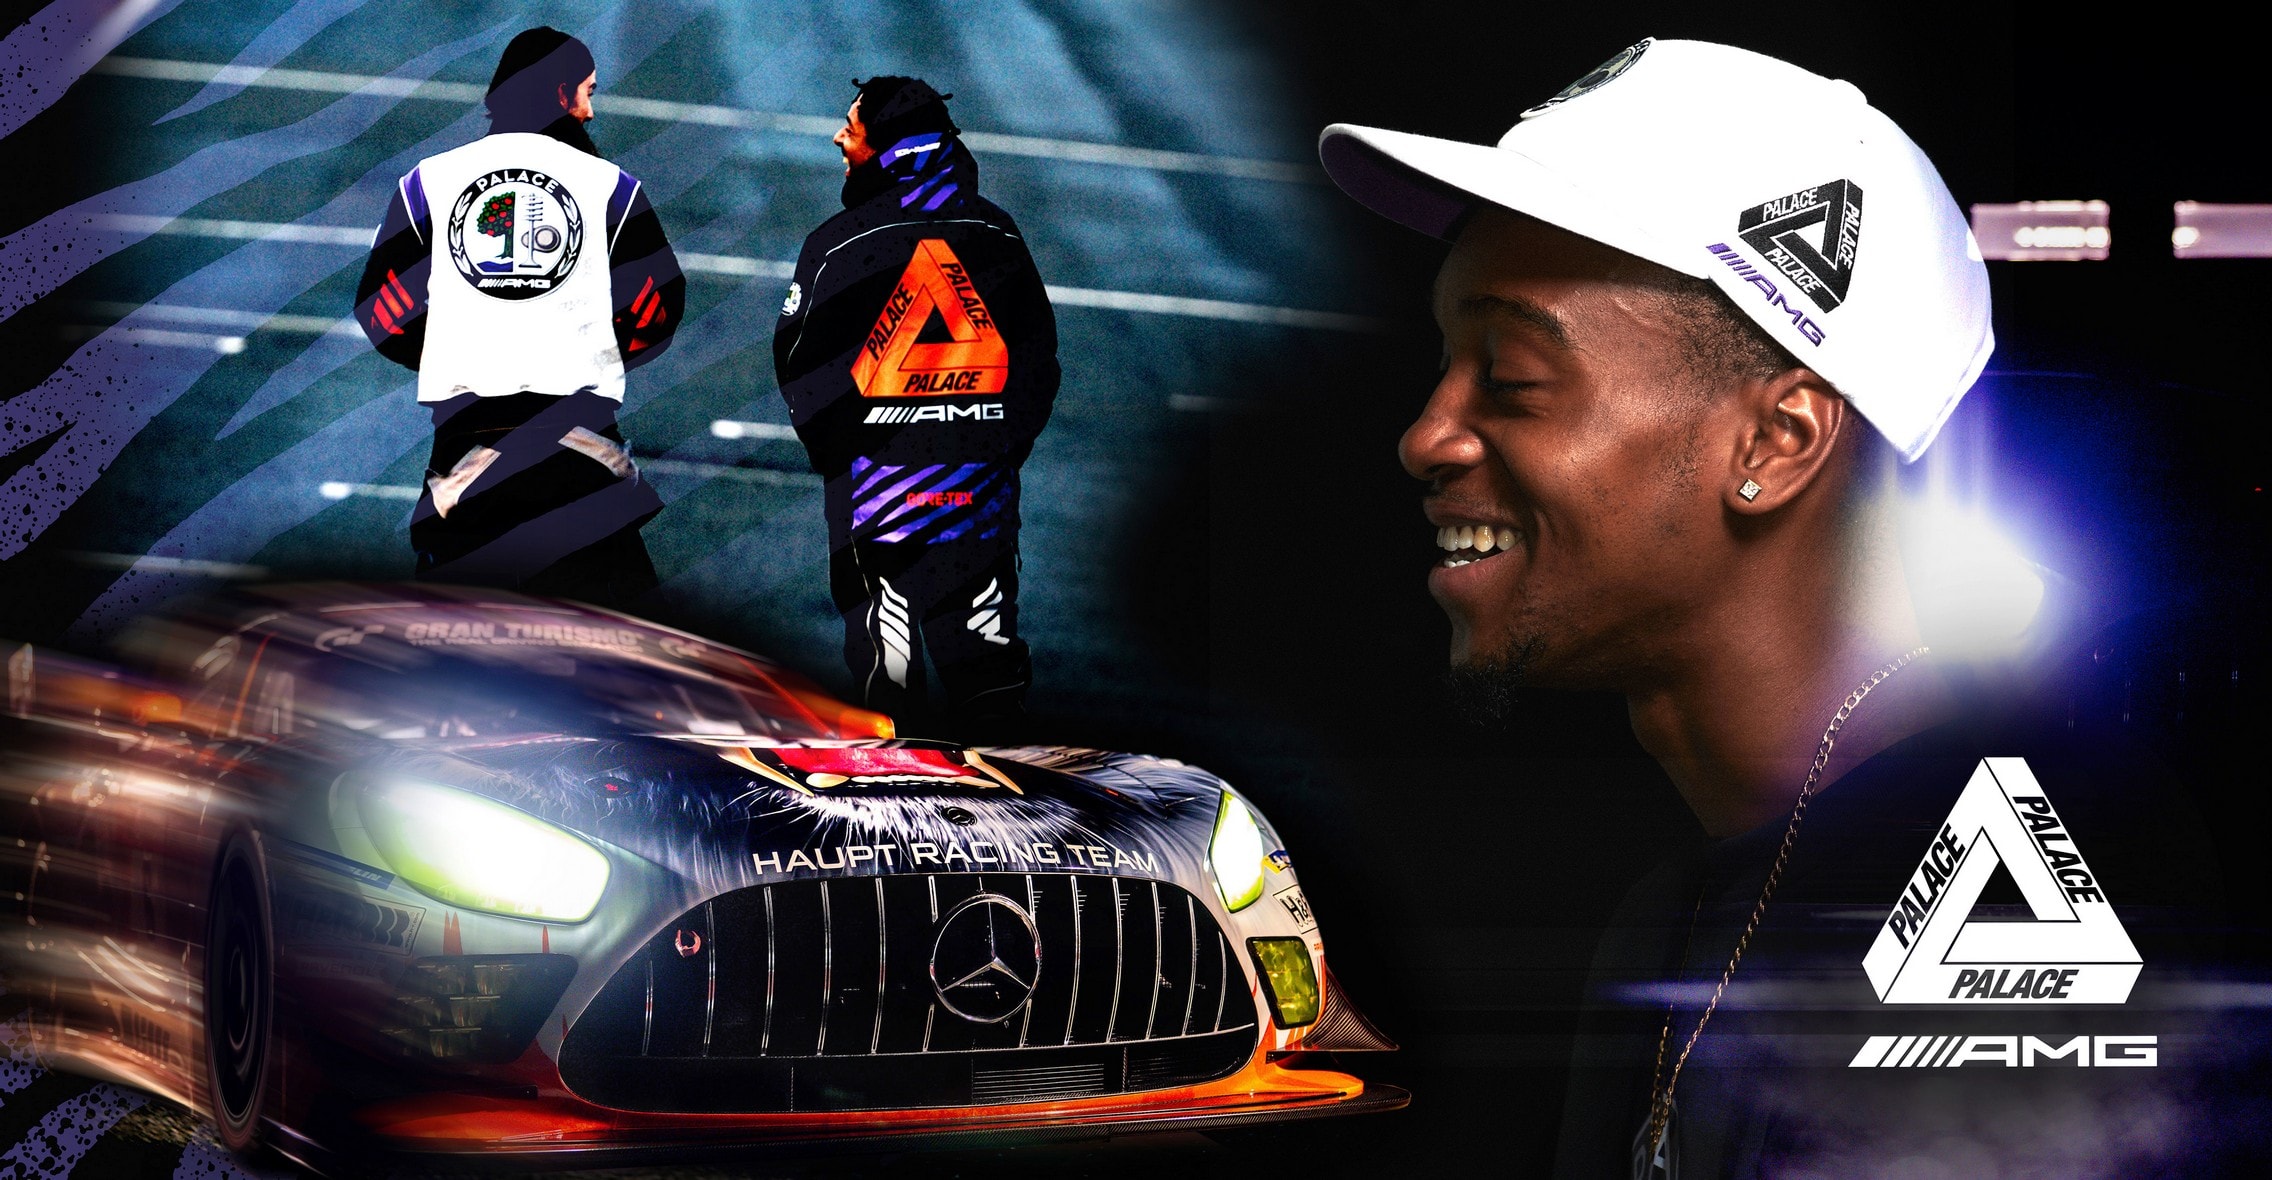 Mercedes-AMG Goes Skateboarding, Palace Designs Car Livery for ...